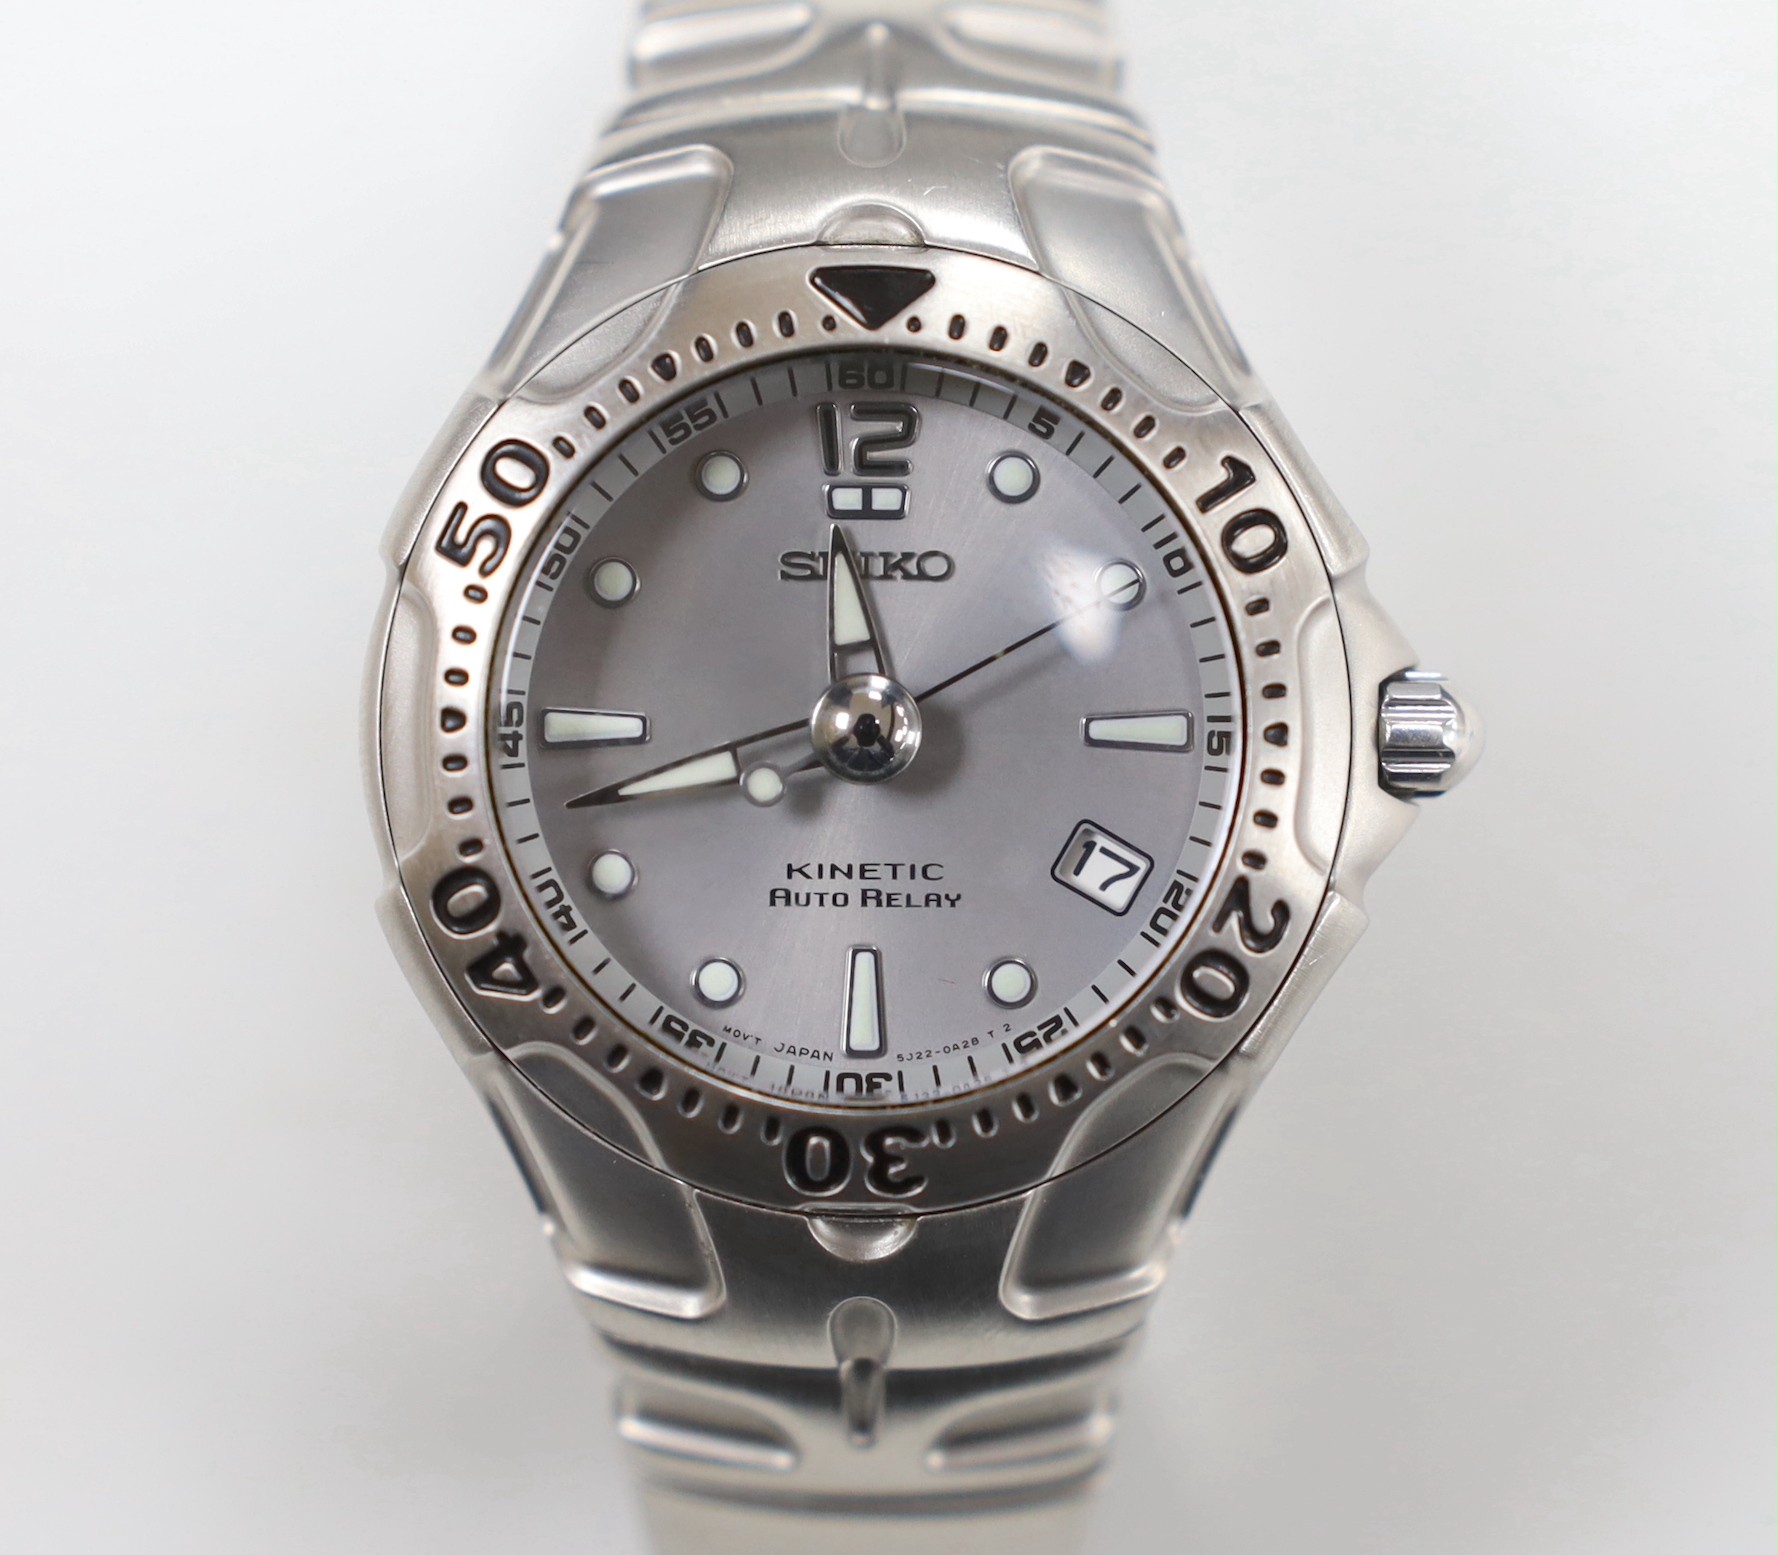 A gentleman's stainless steel Seiko Kinetic Auto Relay wrist watch, on a stainless steel Seiko bracelet, case diameter 40mm, no box or papers.